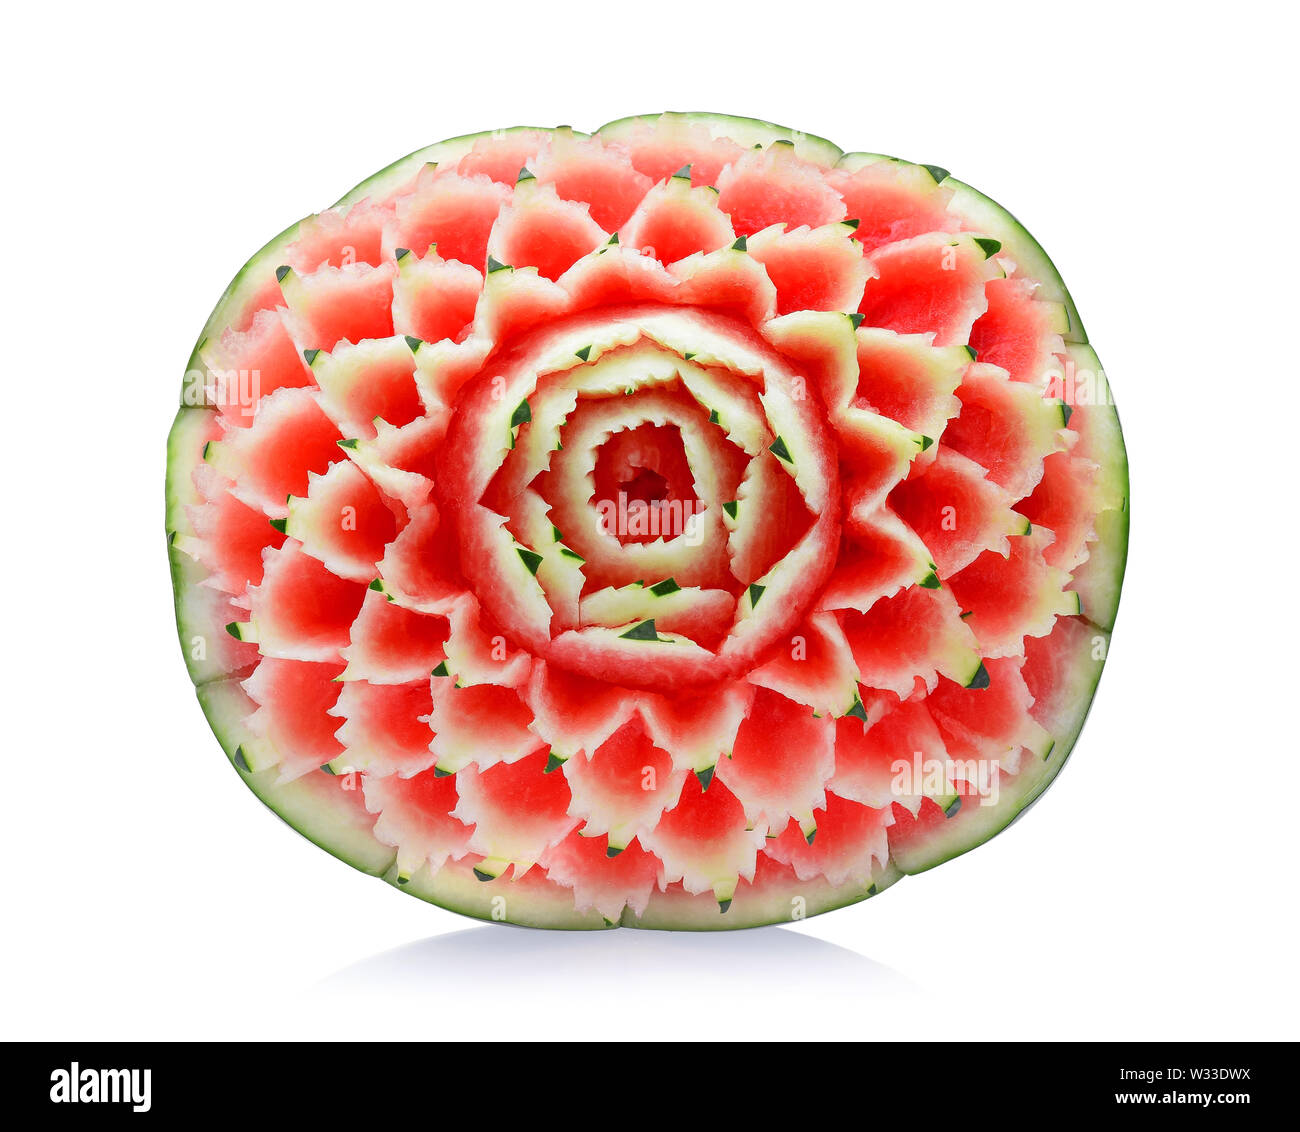 Watermelon carving on white background Stock Photo